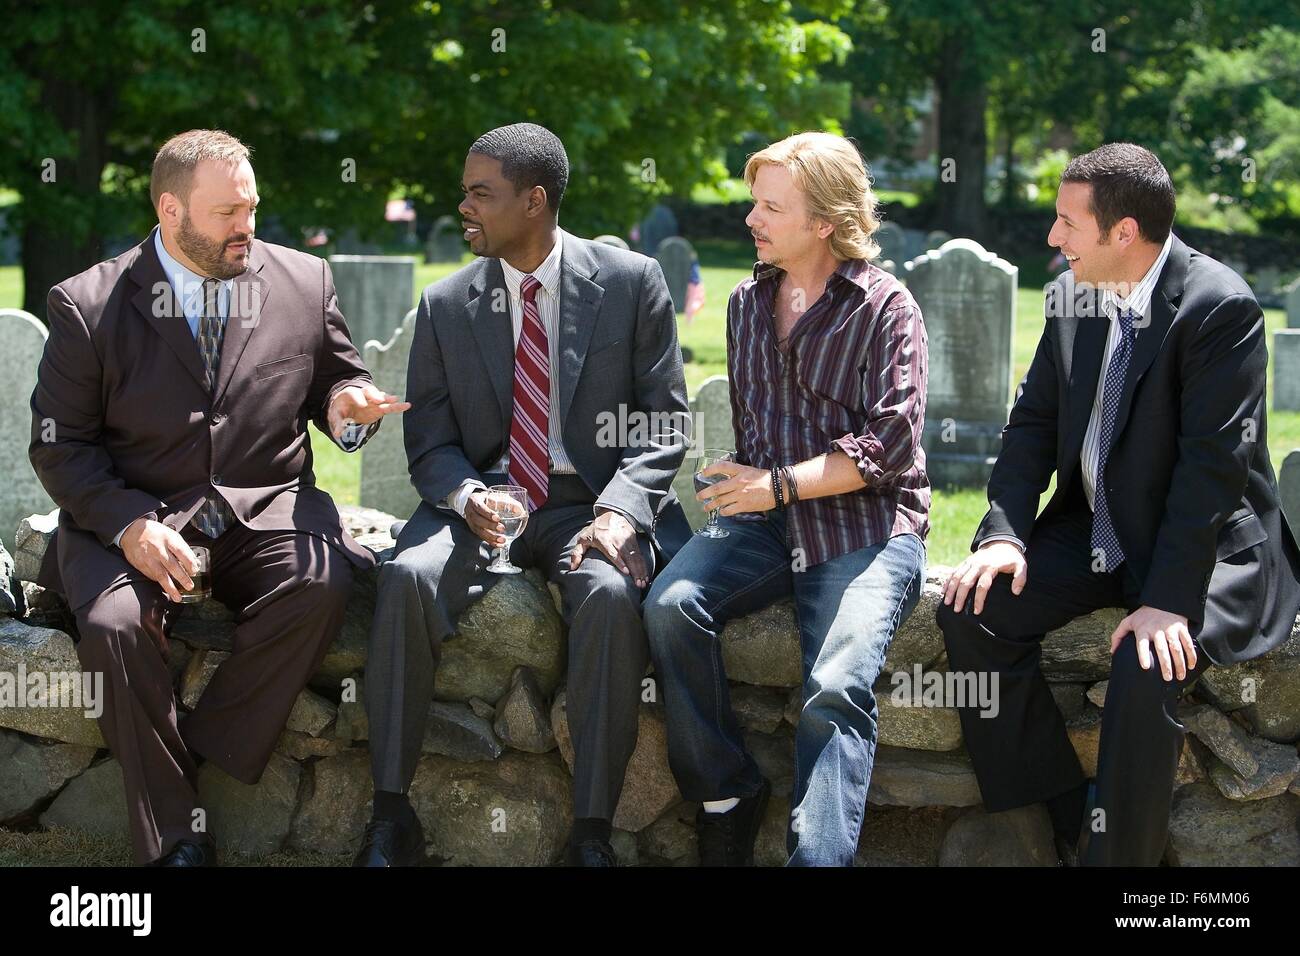 RELEASE DATE: June 25, 2010. MOVIE TITLE: Grown Ups. STUDIO: Columbia Pictures. PLOT: Thirty years after their high school graduation, five good friends reunite for a Fourth of July holiday weekend. PICTURED: CHRIS ROCK as Kurt McKenzie with DAVID SPADE as Marcus Higgins, KEVIN JAMES as Eric Lamonsoff and ADAM SANDLER as Lenny Feder. Stock Photo